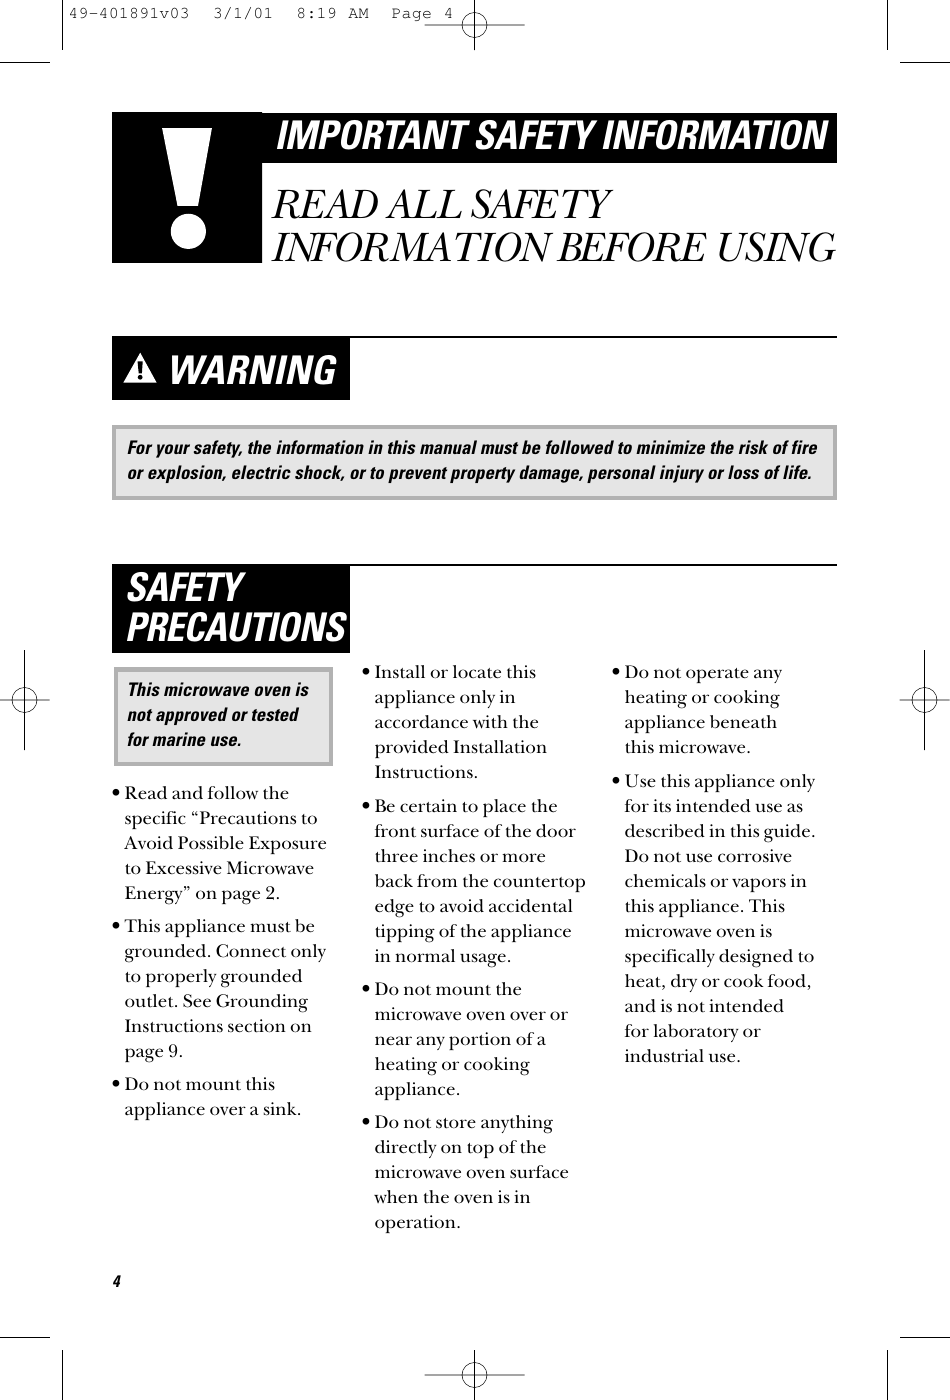 For your safety, the information in this manual must be followed to minimize the risk of fireor explosion, electric shock, or to prevent property damage, personal injury or loss of life.WARNING•Read and follow thespecific “Precautions toAvoid Possible Exposureto Excessive MicrowaveEnergy” on page 2.•This appliance must begrounded. Connect onlyto properly groundedoutlet. See GroundingInstructions section onpage 9.•Do not mount thisappliance over a sink. •Install or locate thisappliance only inaccordance with theprovided InstallationInstructions.•Be certain to place thefront surface of the doorthree inches or moreback from the countertopedge to avoid accidentaltipping of the appliancein normal usage.•Do not mount themicrowave oven over ornear any portion of aheating or cookingappliance.•Do not store anythingdirectly on top of themicrowave oven surfacewhen the oven is inoperation.•Do not operate anyheating or cookingappliance beneath this microwave.•Use this appliance onlyfor its intended use asdescribed in this guide.Do not use corrosivechemicals or vapors inthis appliance. Thismicrowave oven isspecifically designed toheat, dry or cook food,and is not intended for laboratory orindustrial use.This microwave oven isnot approved or testedfor marine use.SAFETYPRECAUTIONS4IMPORTANT SAFETY INFORMATIONREAD ALL SAFETYINFORMATION BEFORE USING49-401891v03  3/1/01  8:19 AM  Page 4